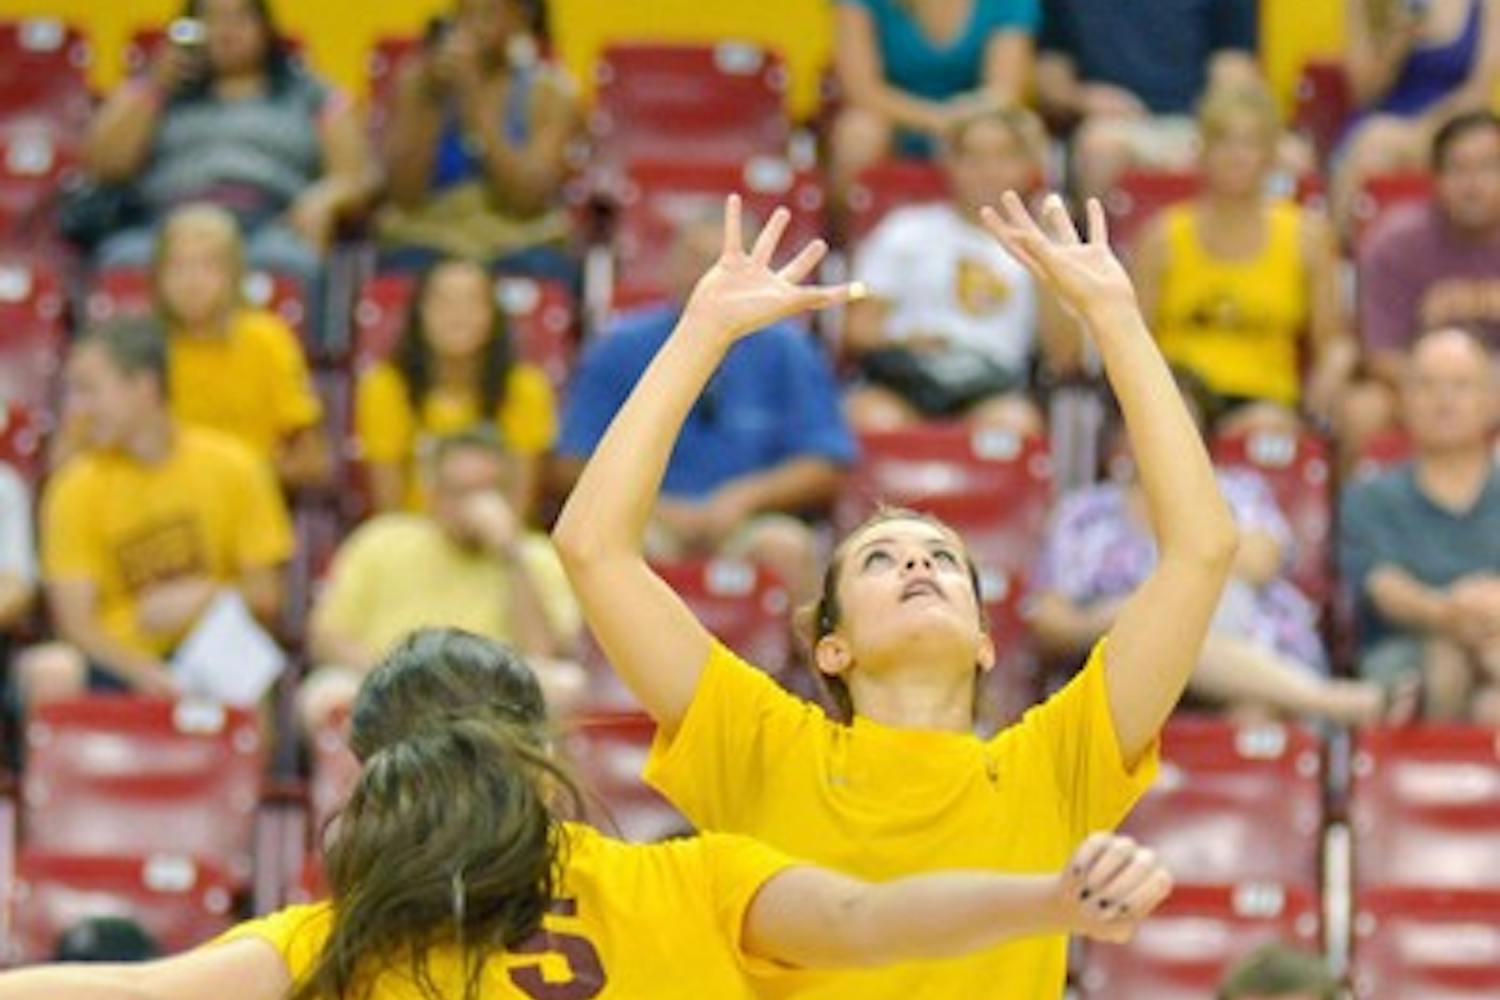 WELCOME BACK: ASU sophomore setter Sarah McGaffin (right) makes a set while sophomore middle blocker Alexis Pinson looks on. The Sun Devils return to conference play against old foes Oregon and Oregon State this weekend. (Photo by Aaron Lavinsky)